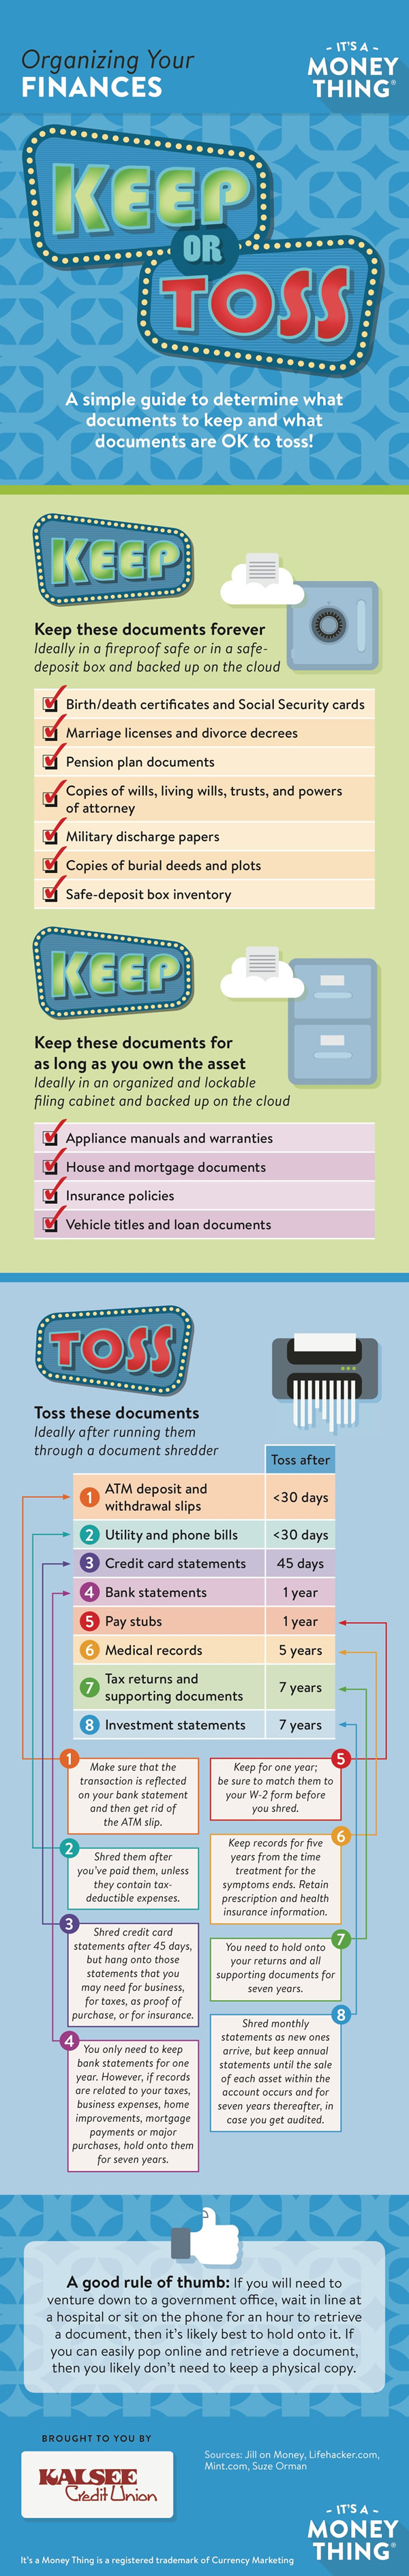 organizing your finances infographic, click for transcription